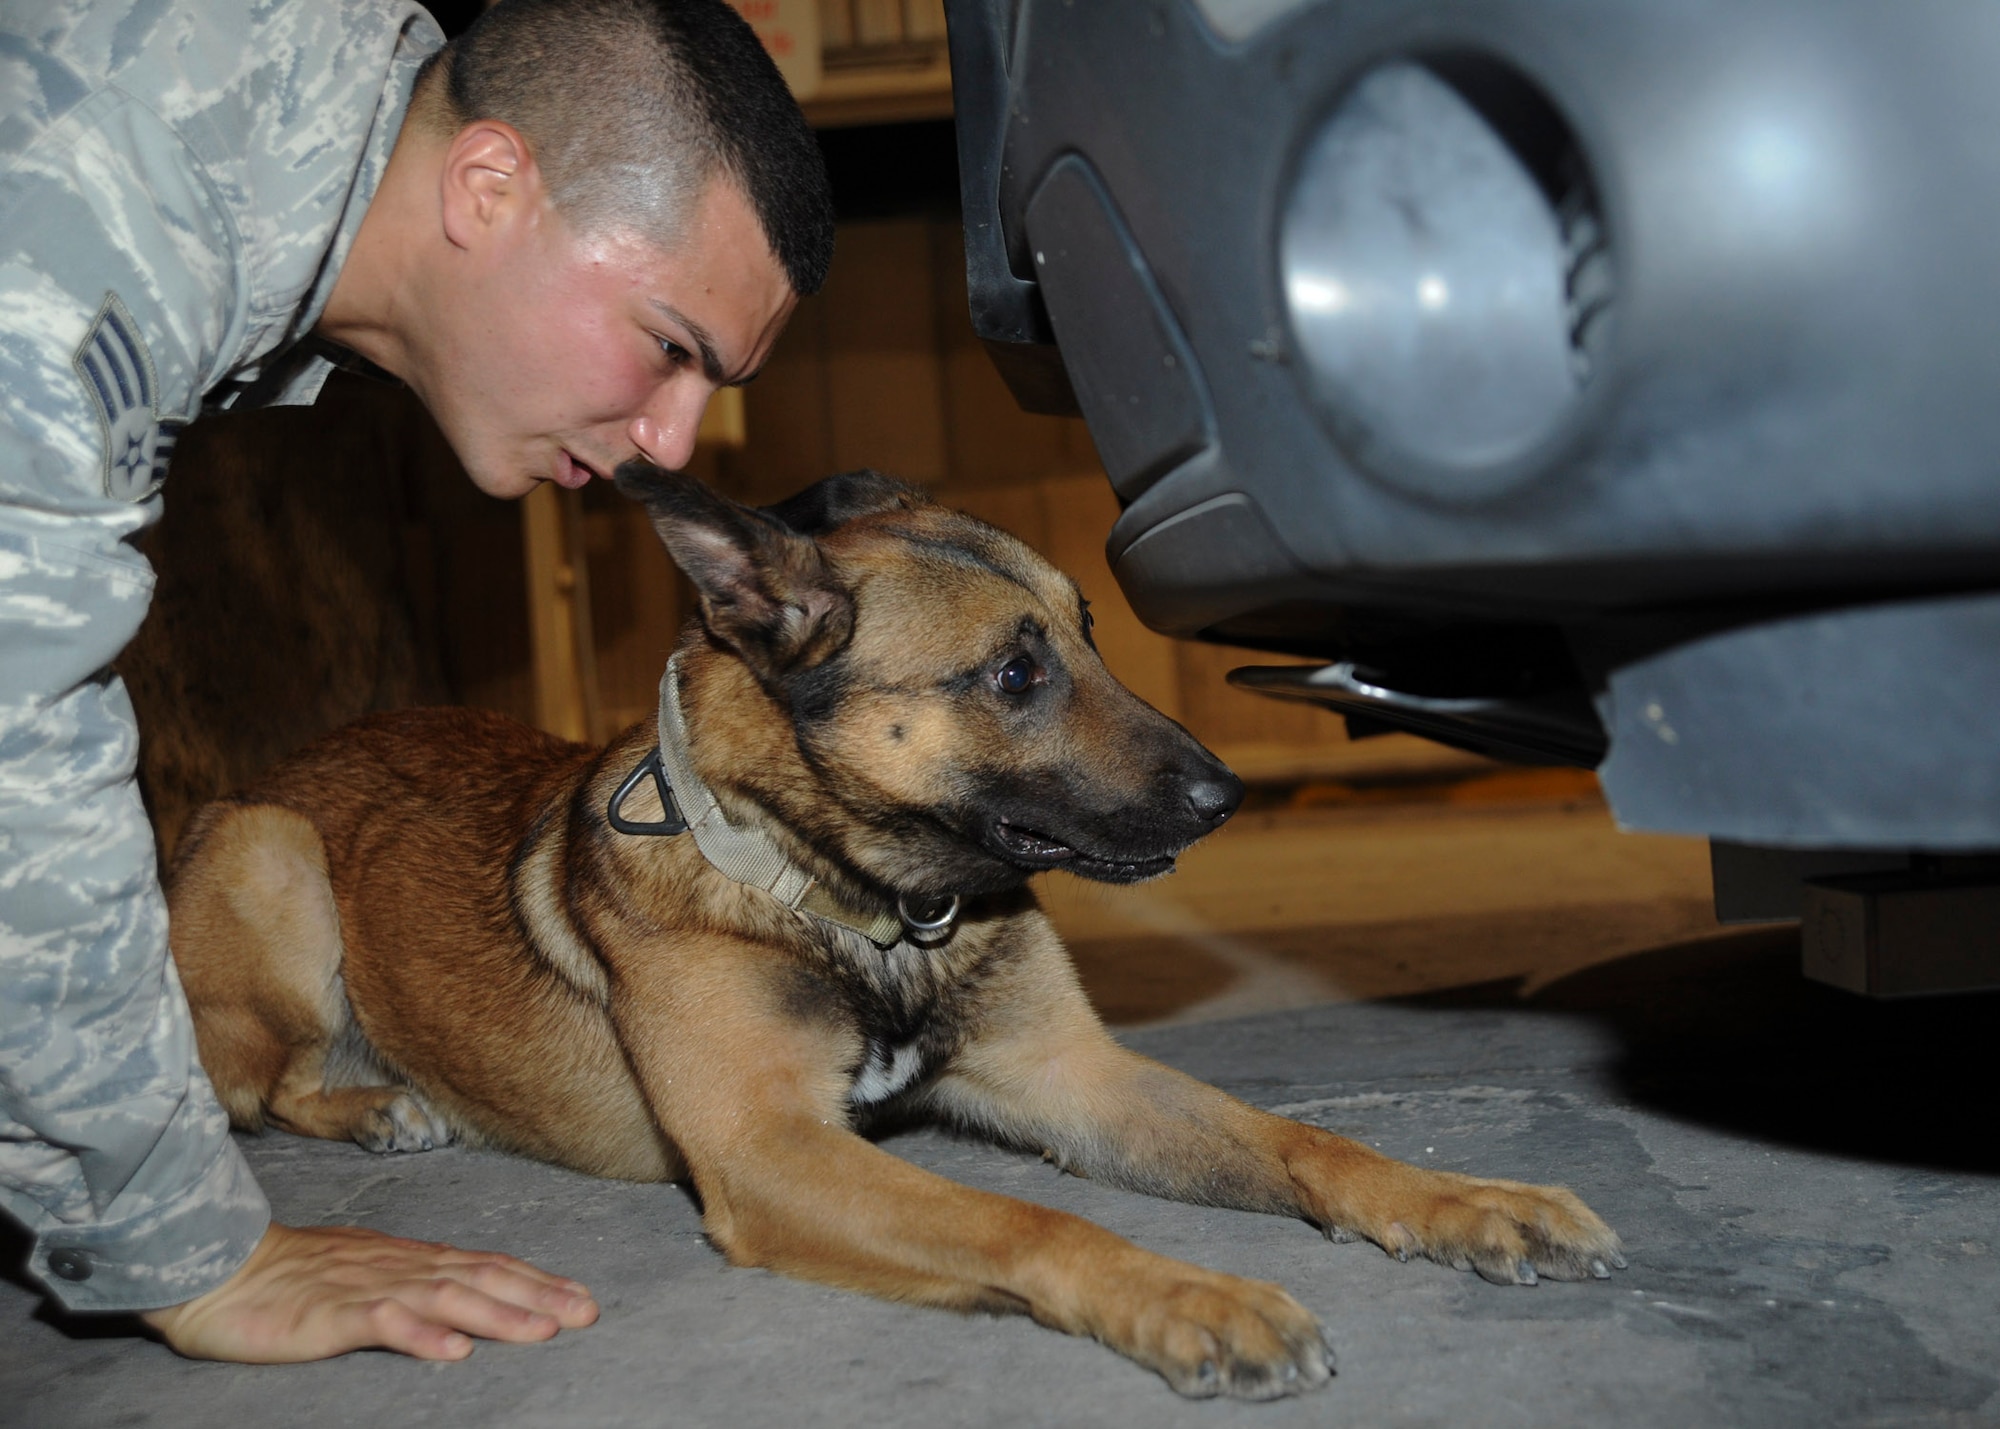 Senior Airman Andrew Hanus and Beni look underneath the bumper of a car during a vehicle check at the 379th Air Expeditionary Wing in Southwest Asia, July 2, 2013. The 379th Expeditionary Security Forces Squadron military working dog section performs vehicle inspections on every car entering the base. Hanus is a 379th ESFS MWD handler and Beni is a 379th ESFS MWD both deployed from Travis Air Force Base, Calif. (U.S. Air Force photo/Senior Airman Bahja J. Jones) 